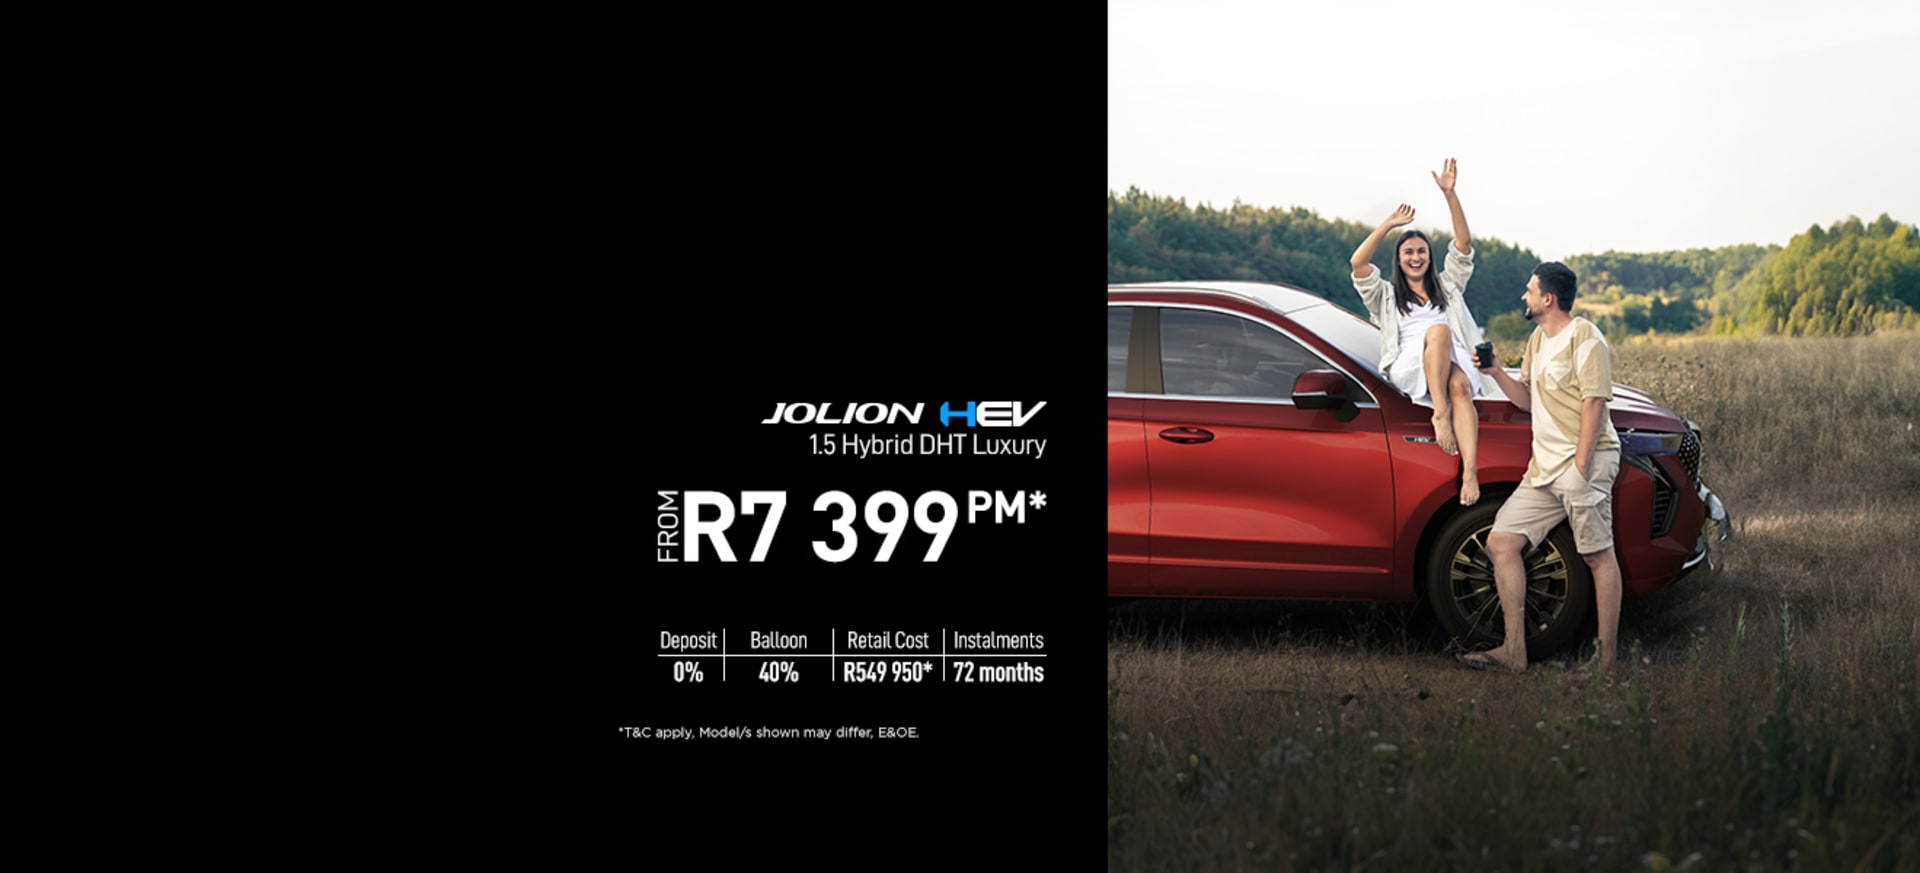 Jolion HEV 1.5L Hybrid Lux From R7 399pm*